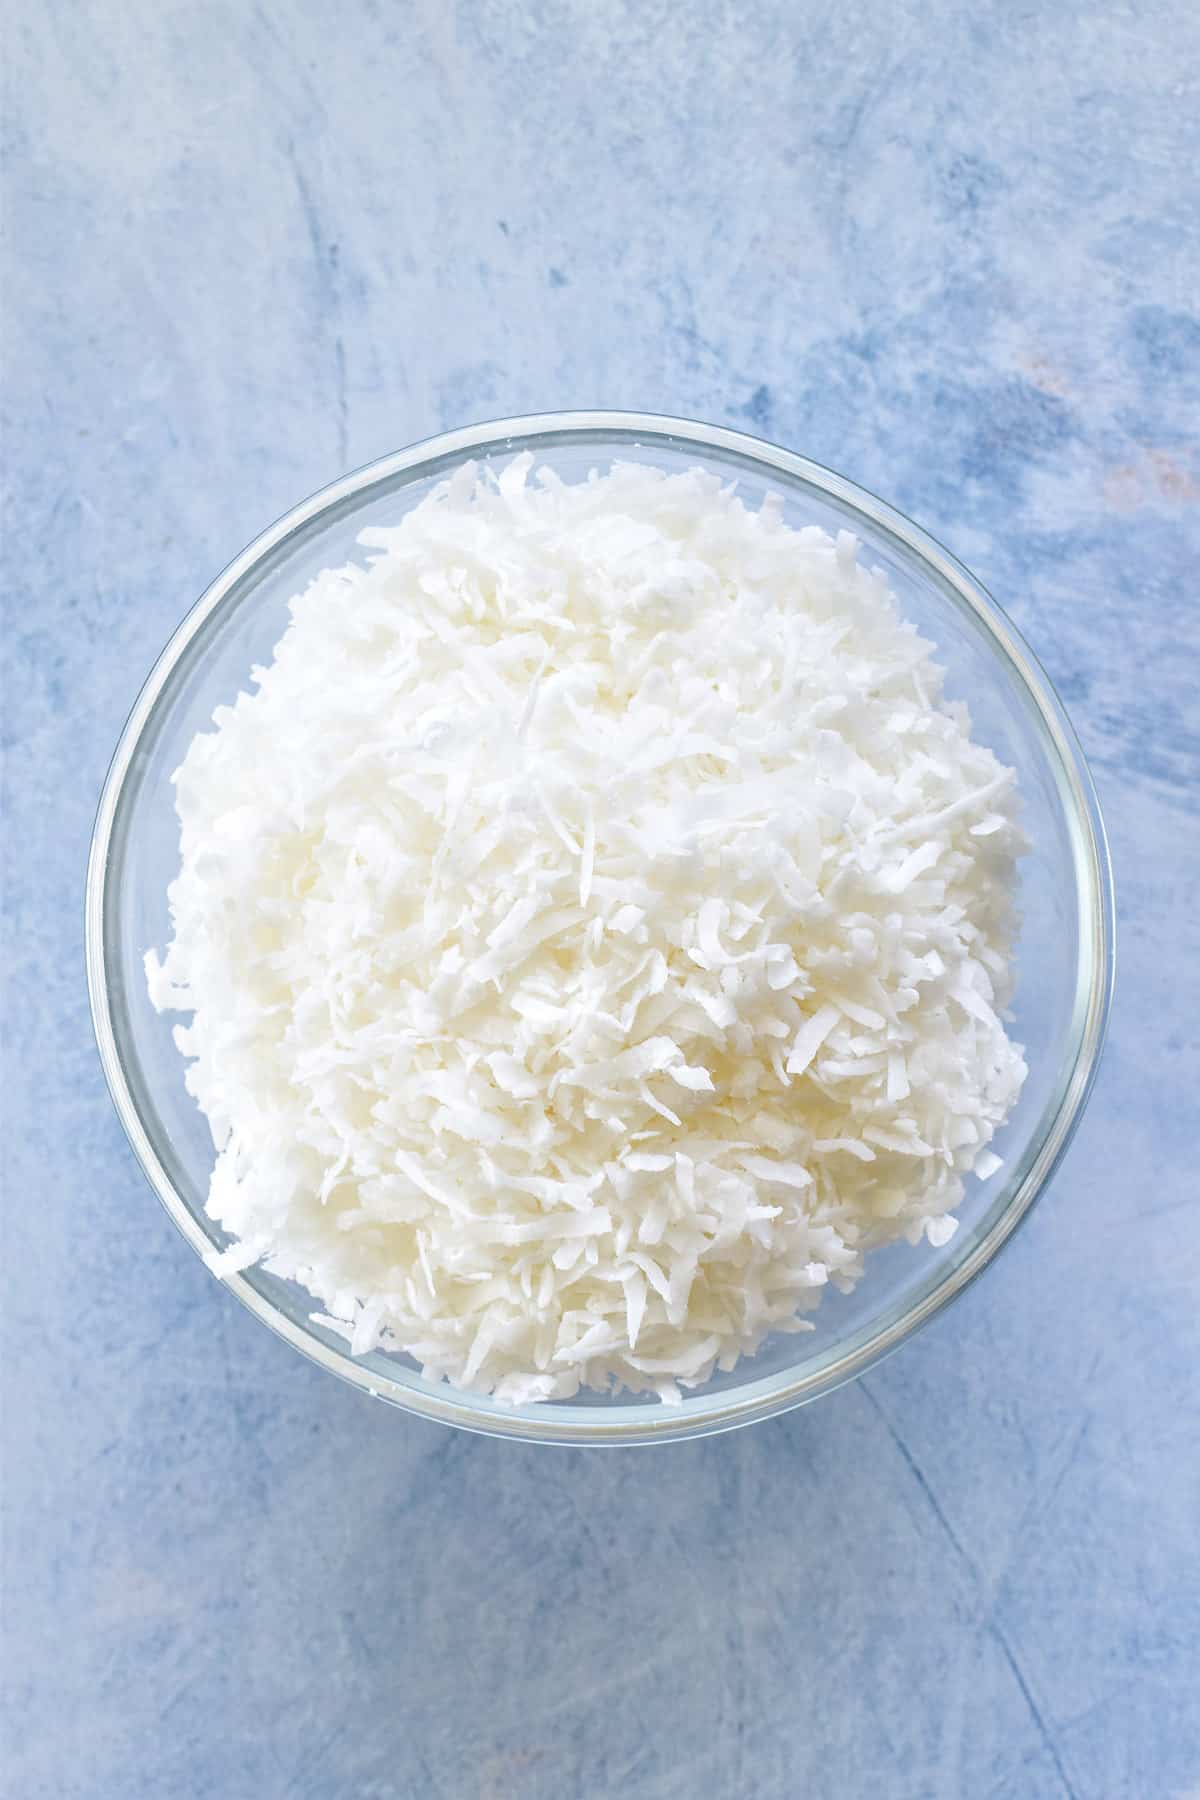 Shredded coconut in a glass bowl